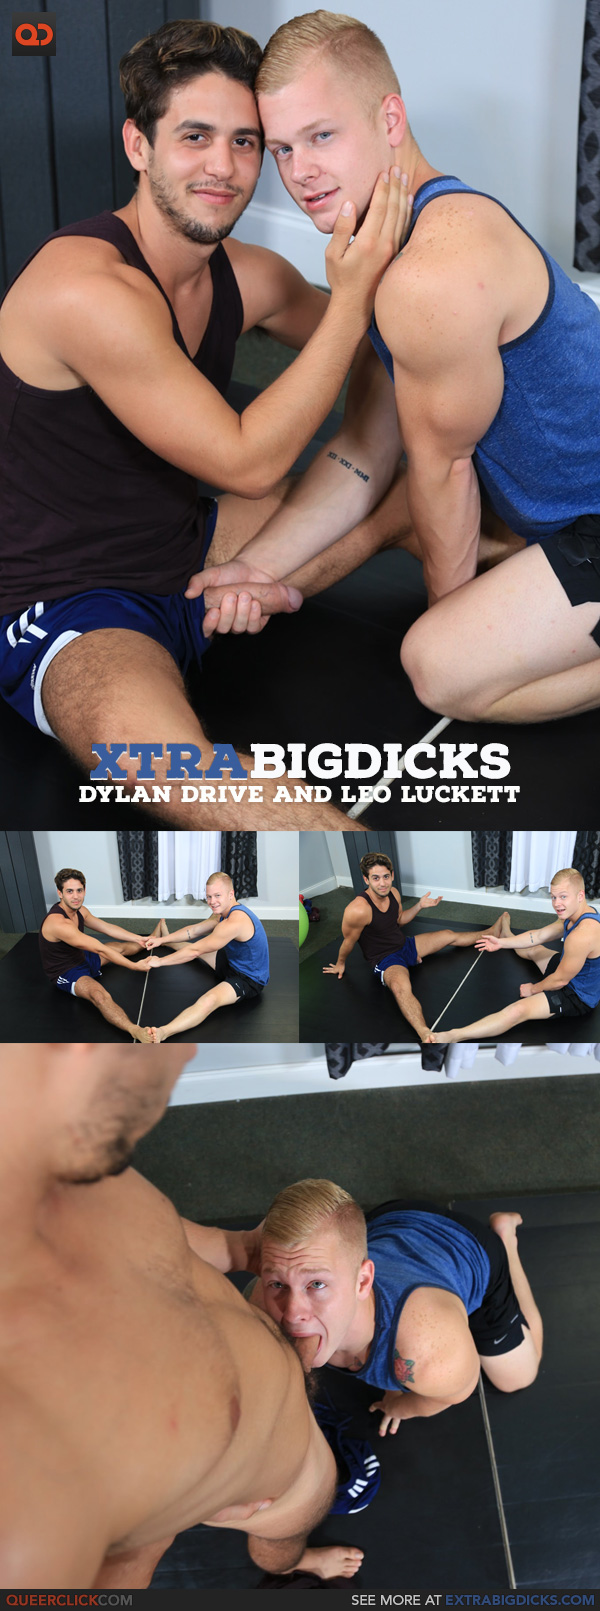 Extra Big Dicks: Dylan Drive and Leo Luckett